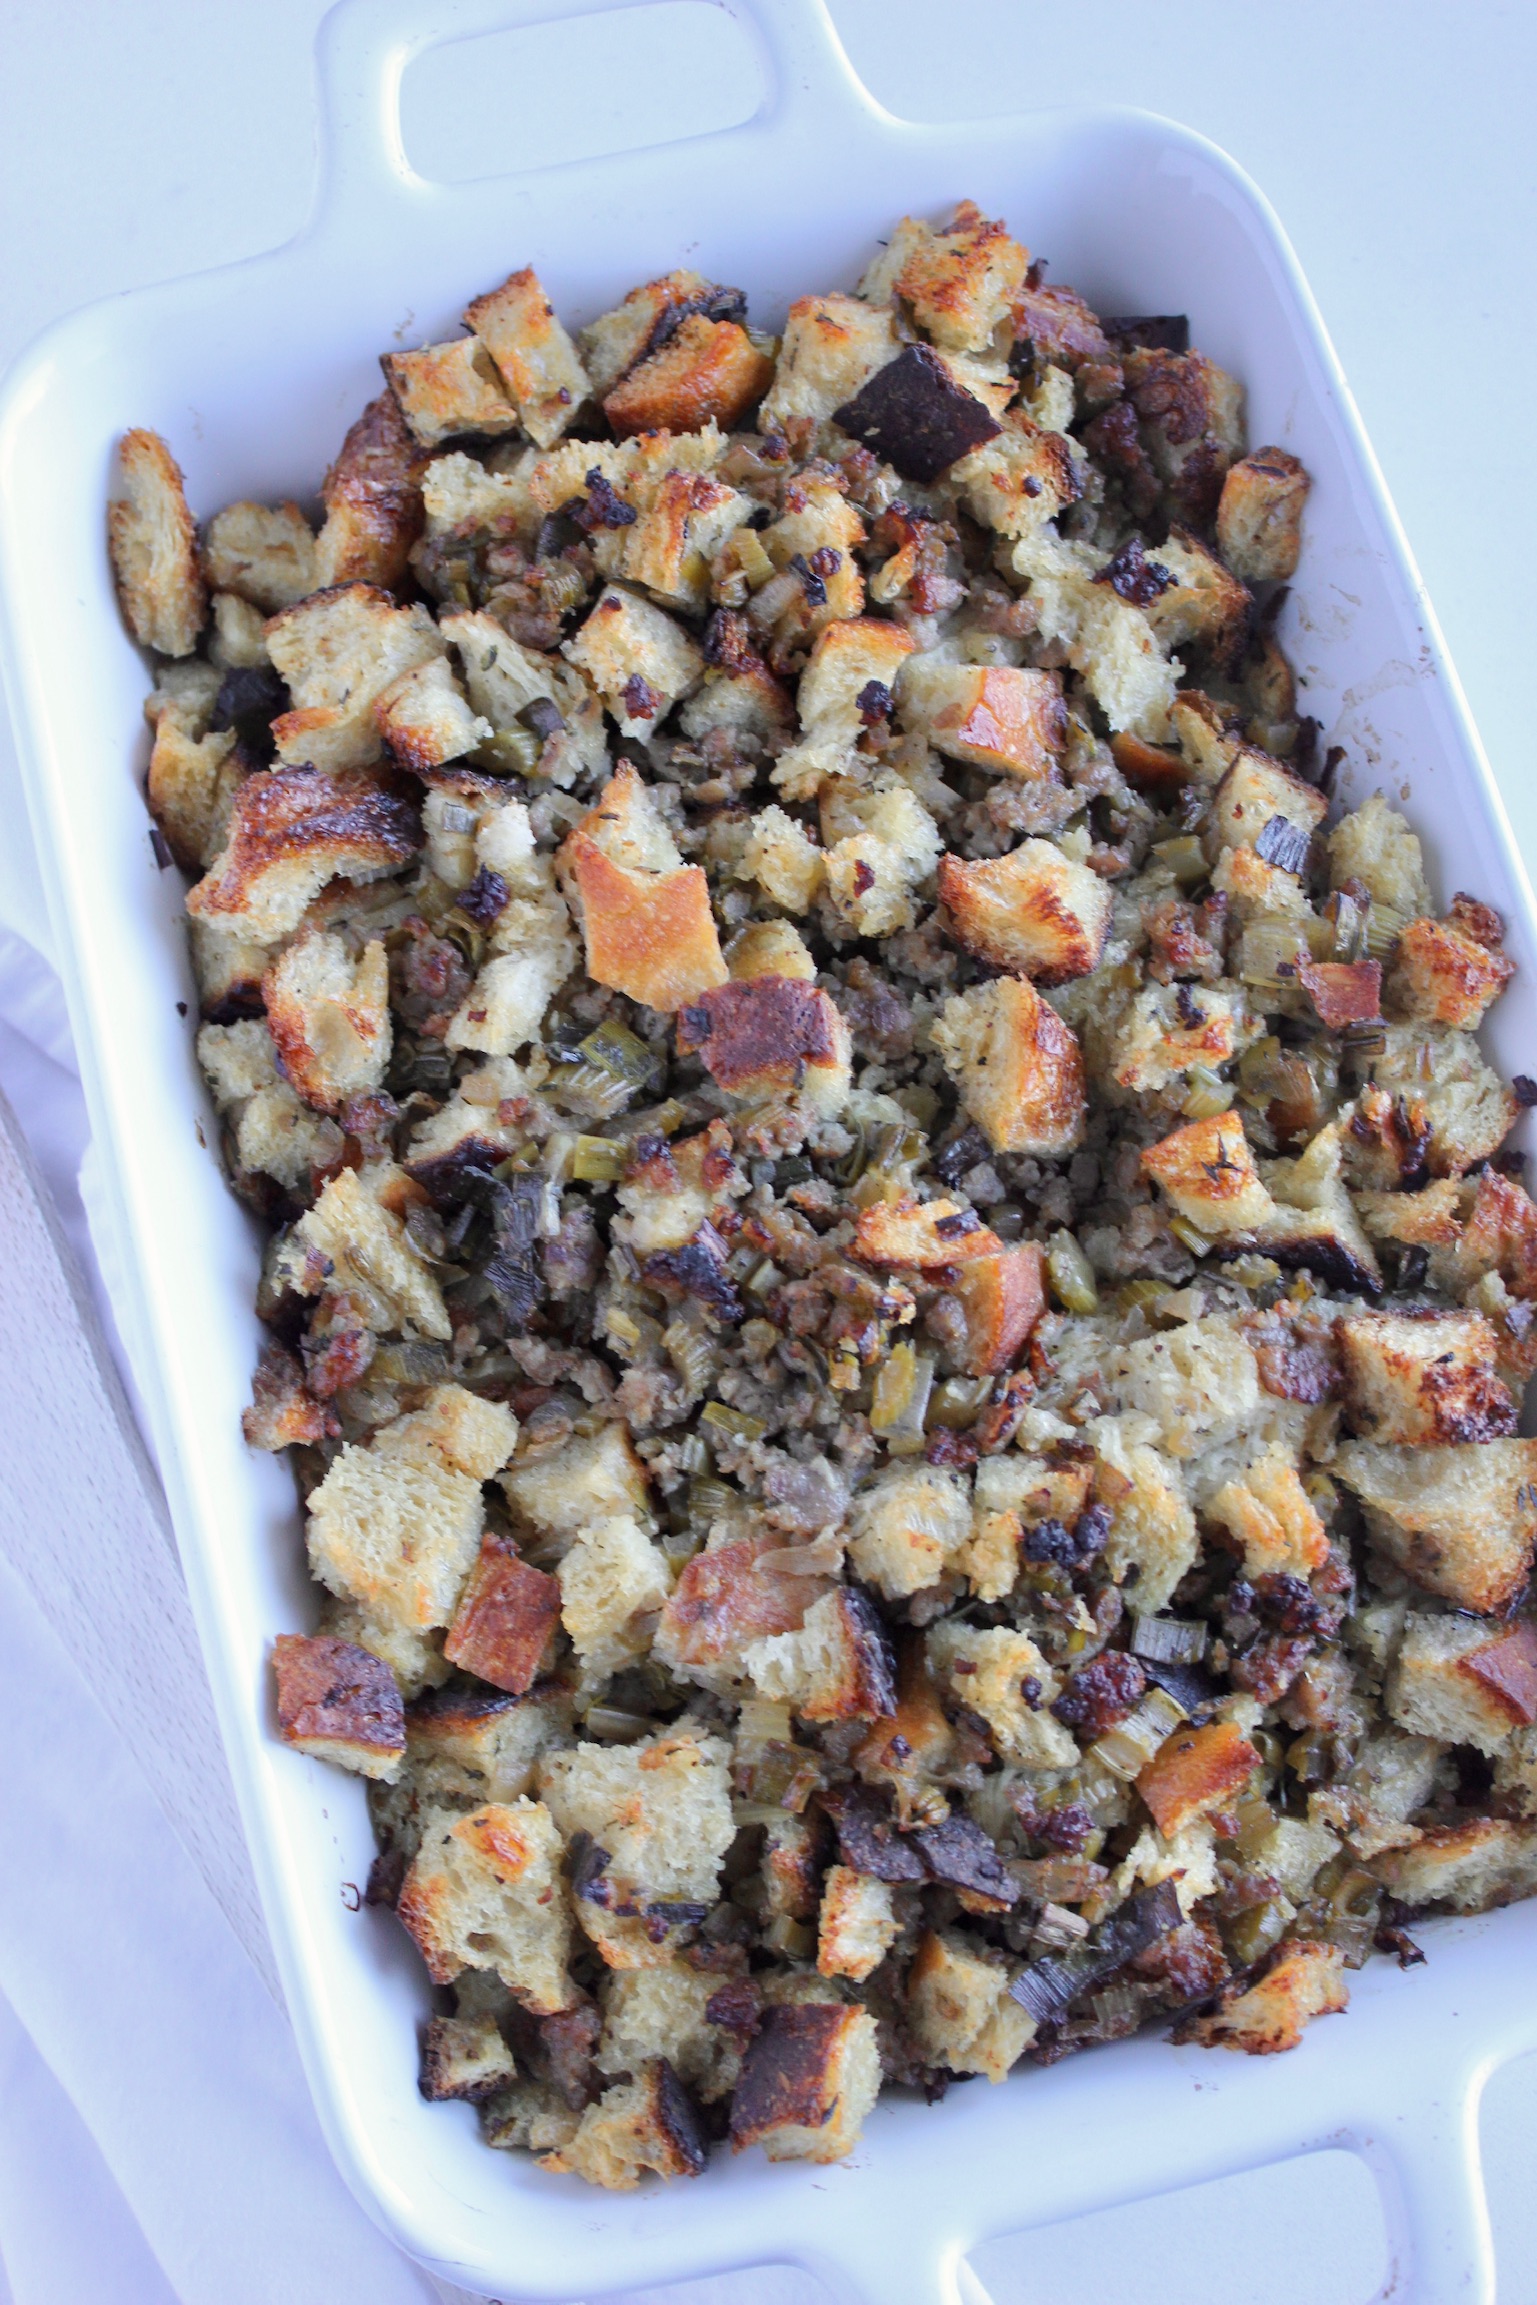 Classic stuffing made from sourdough bread and country sausage